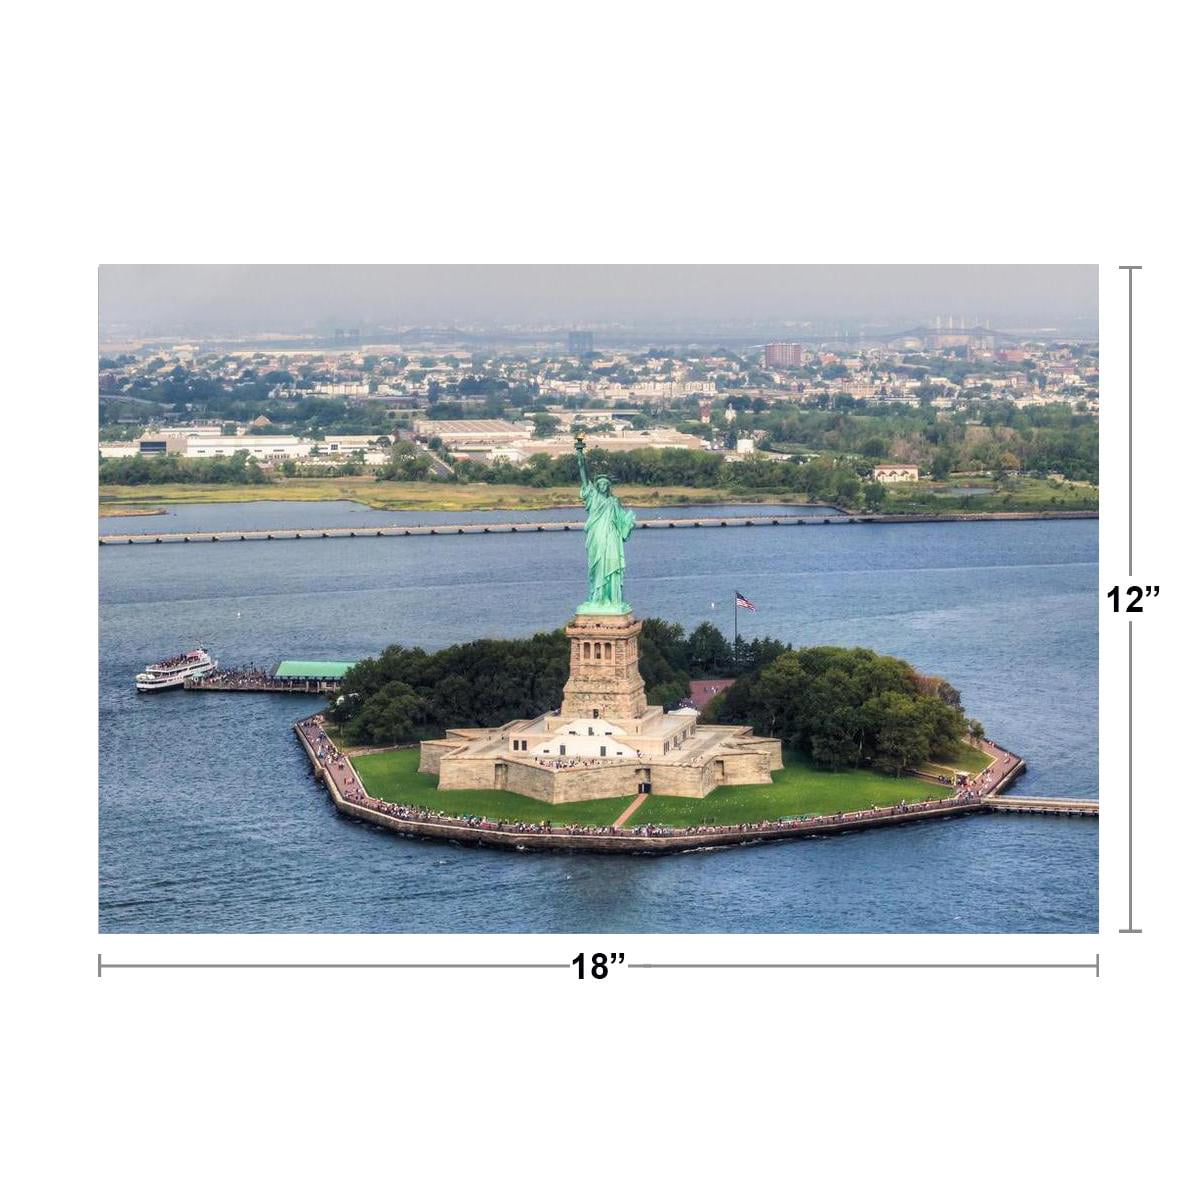 Aerial View of Statue of Liberty New York City Photo Art Print Poster 18x12 inch 